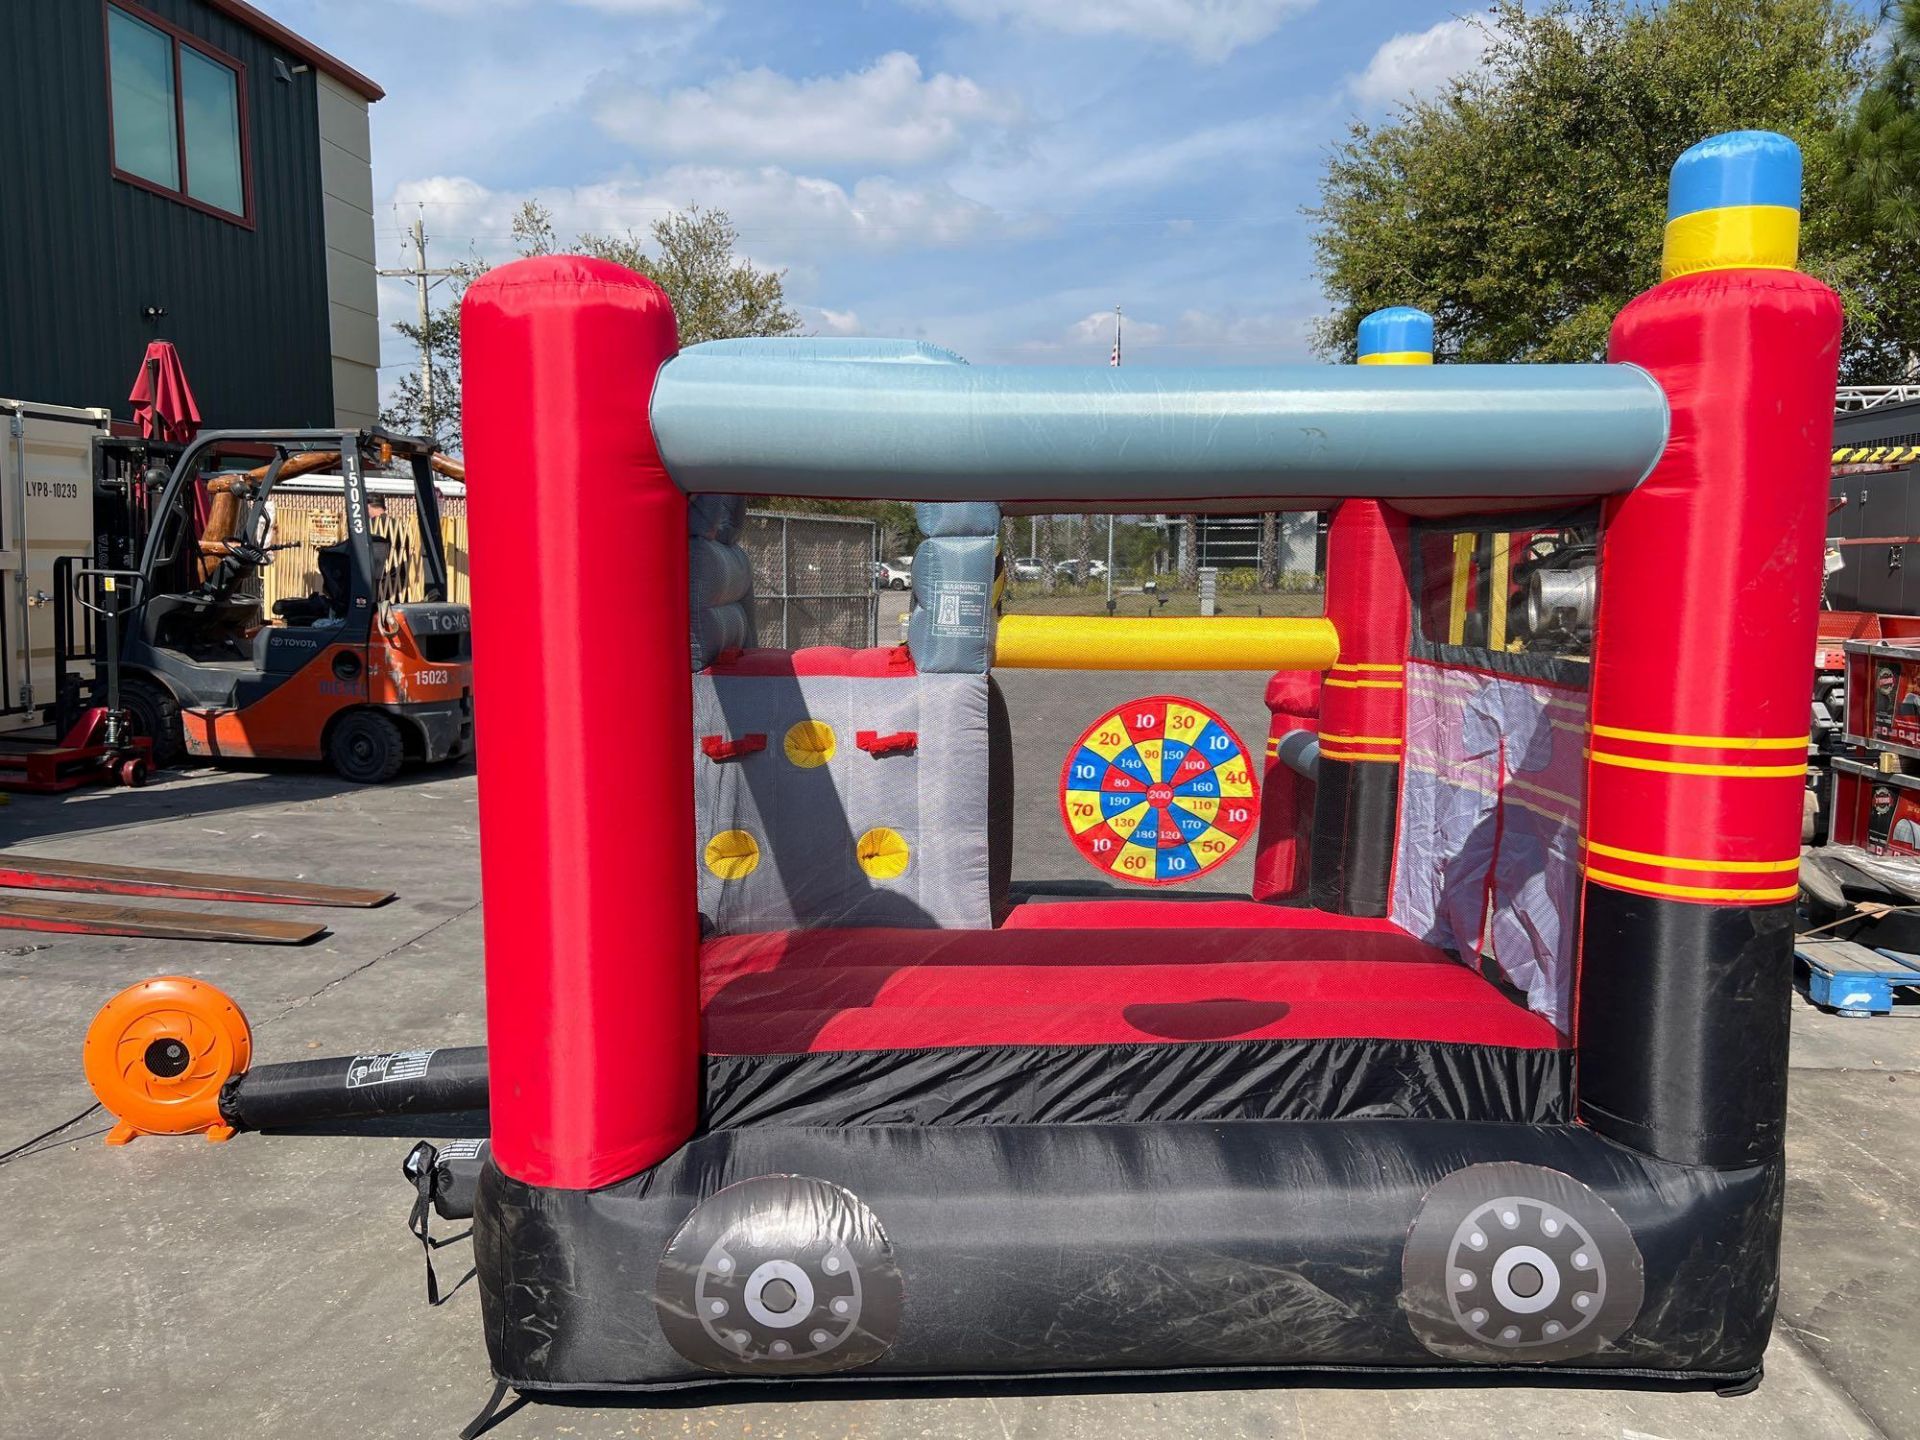 UNUSED BLOW-UP BOUNCY FIRE STATION PLAY YARD WITH SLIDE, VELCRO DARTS, BALLS, STAKES, & BLOWER - Image 7 of 12